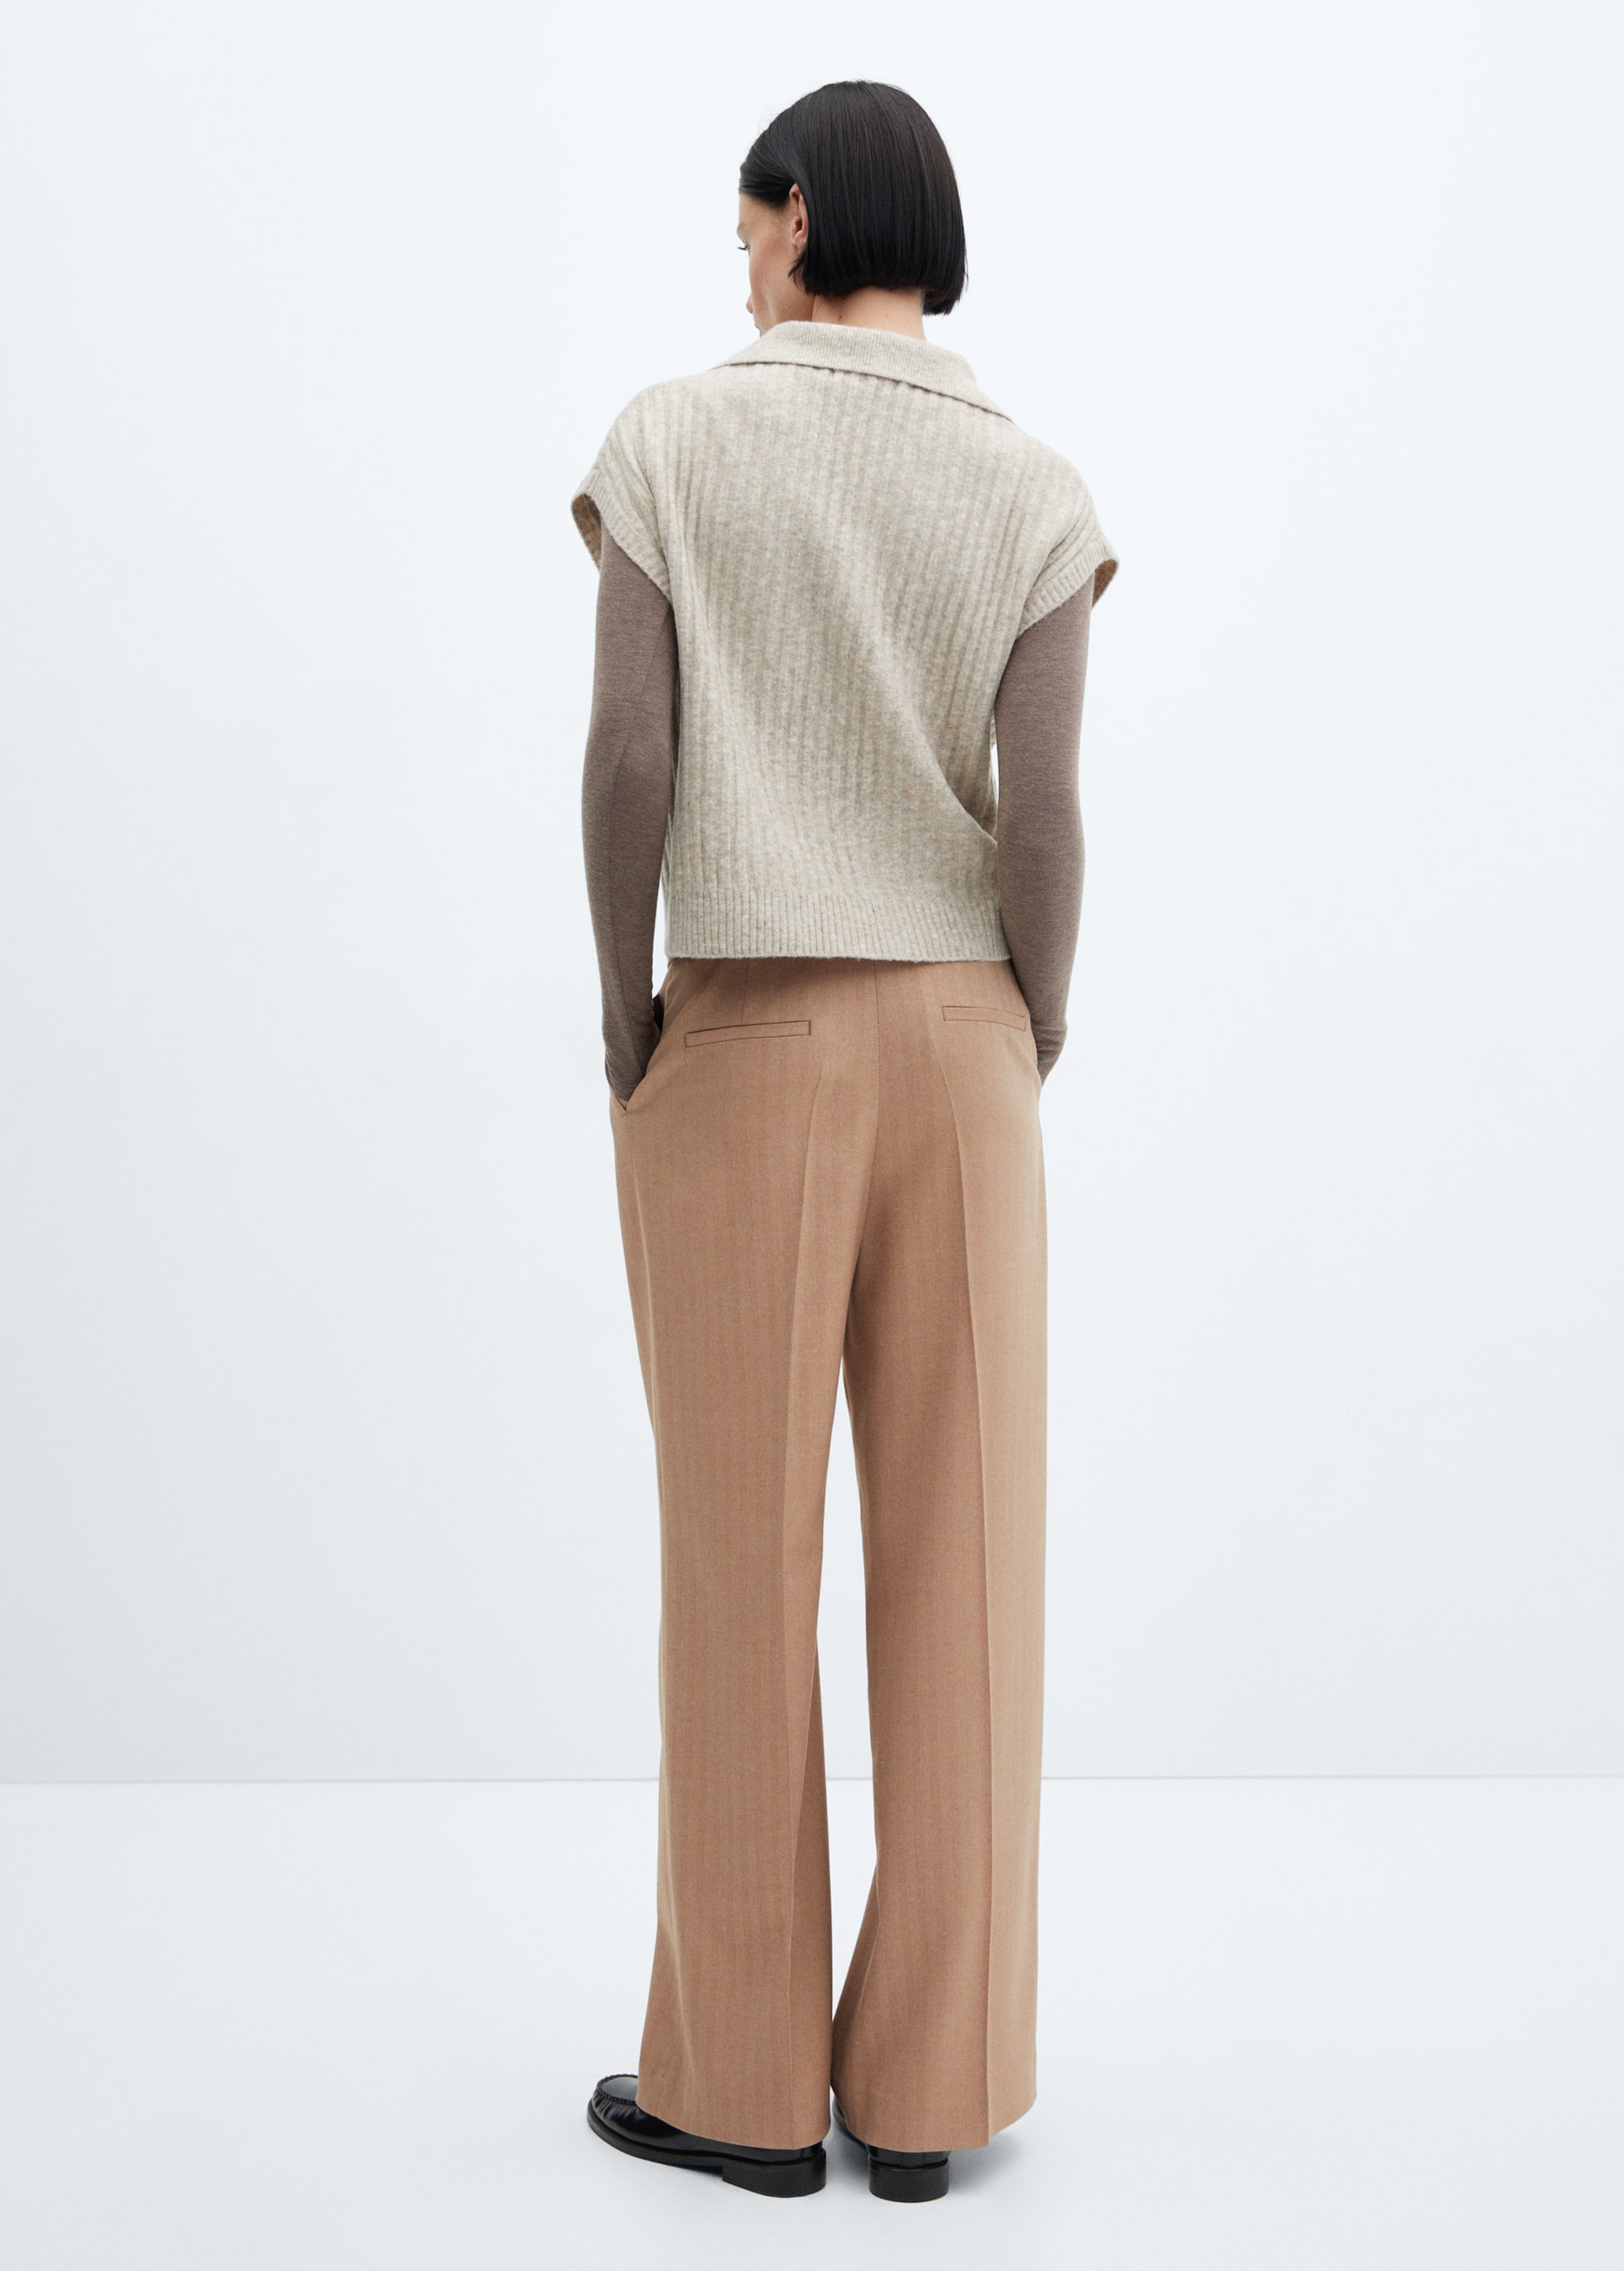 Chalk-stripe trousers - Reverse of the article